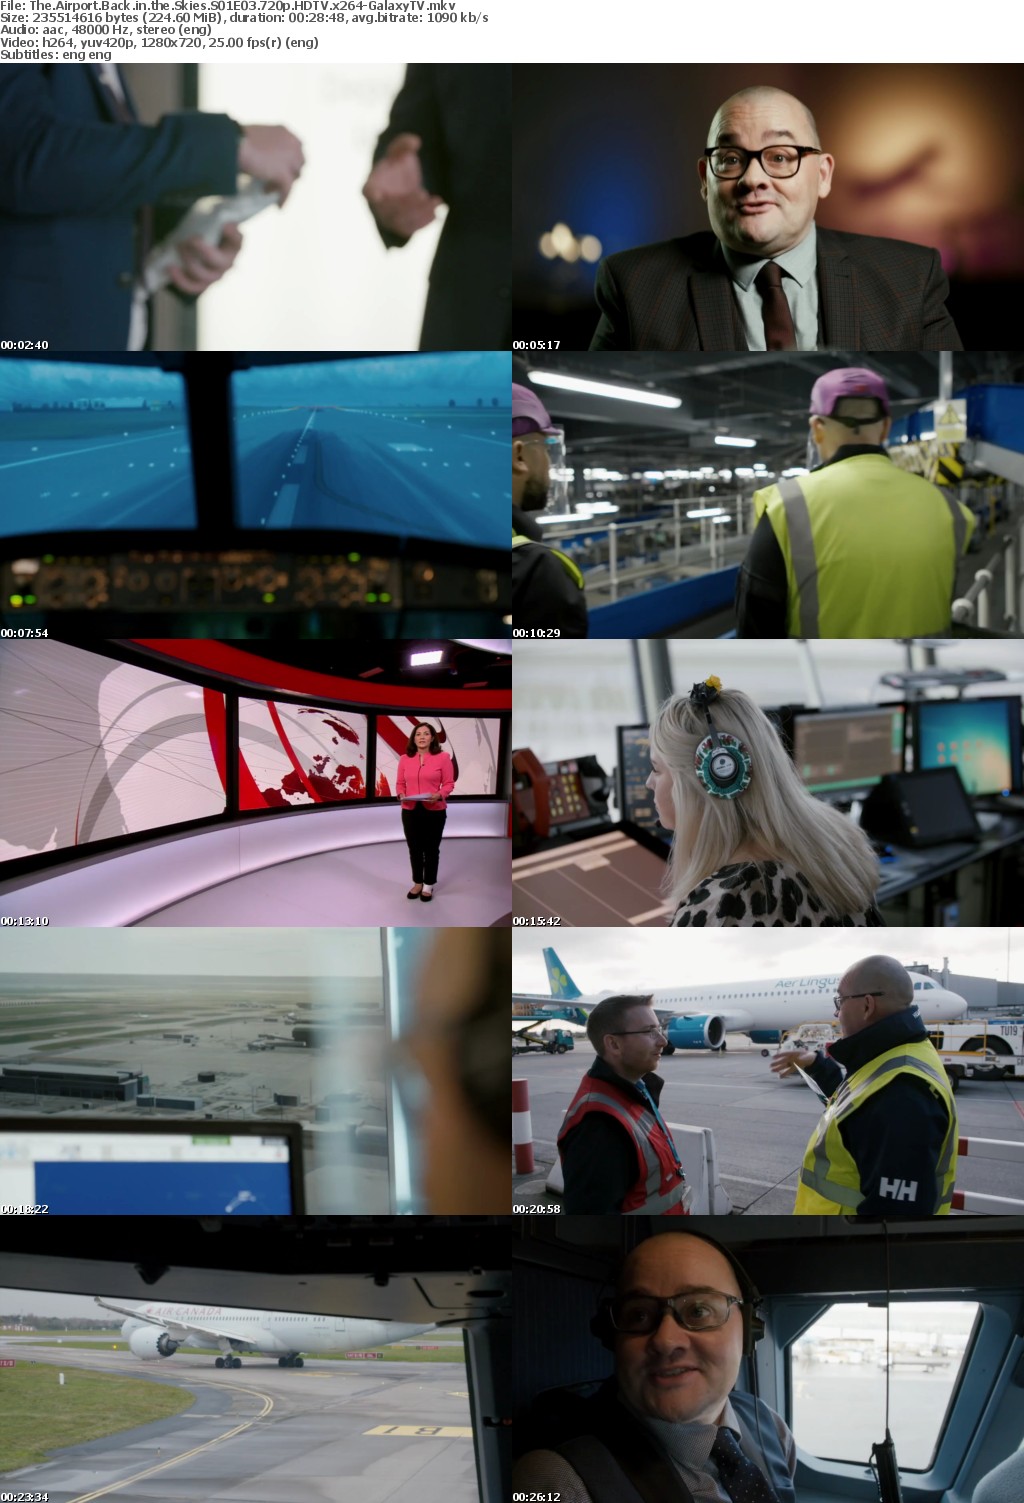 The Airport Back in the Skies S01 COMPLETE 720p HDTV x264-GalaxyTV